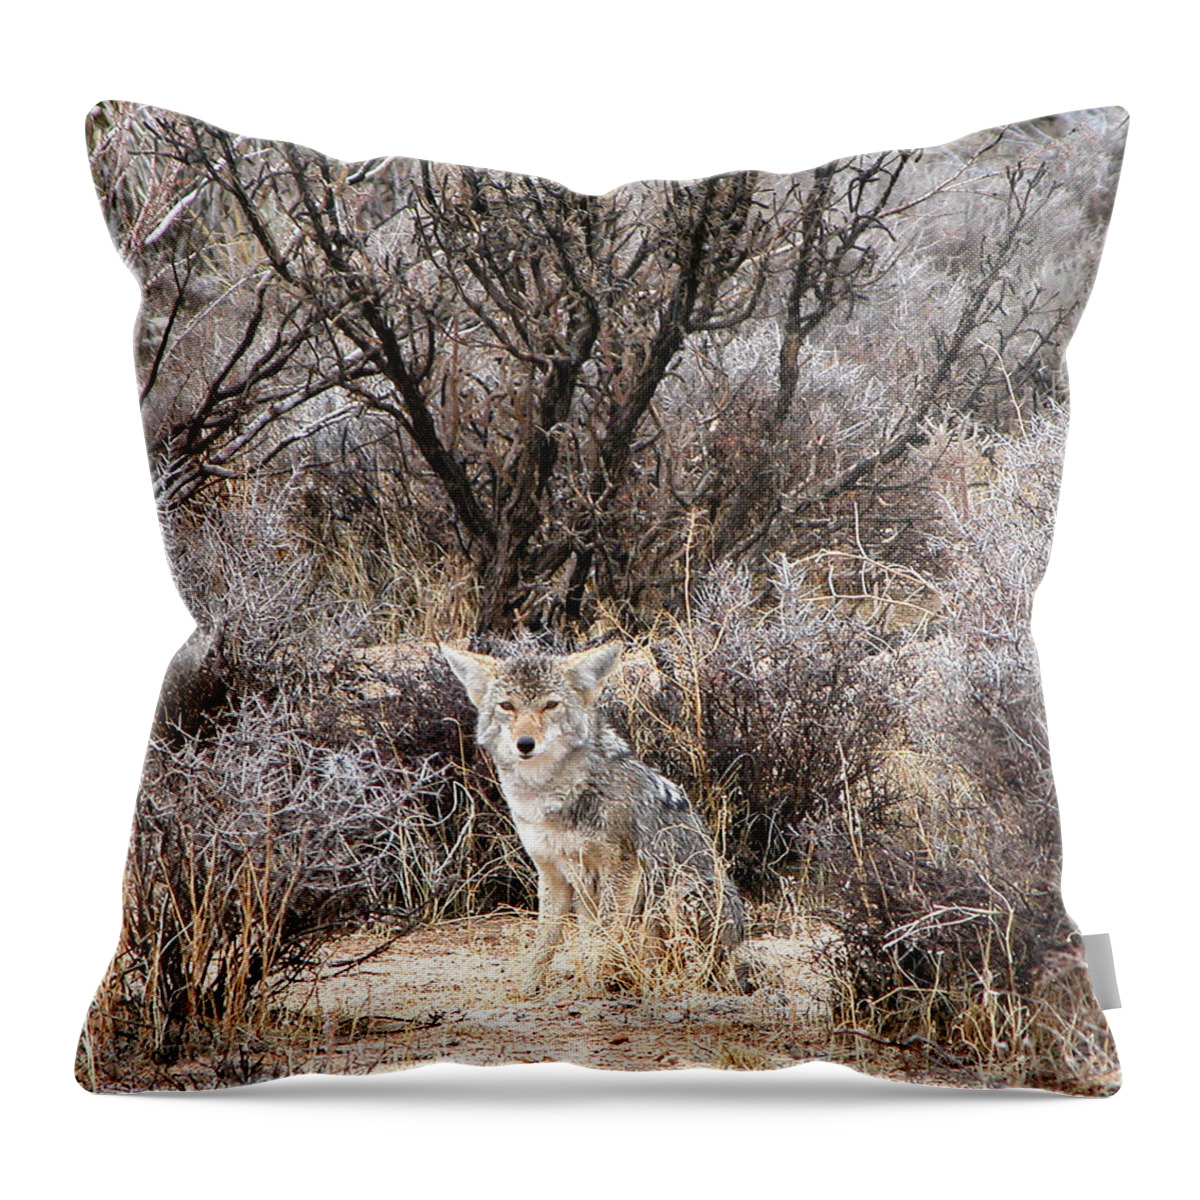 Coyote Throw Pillow featuring the photograph Coyote by Perry Hoffman